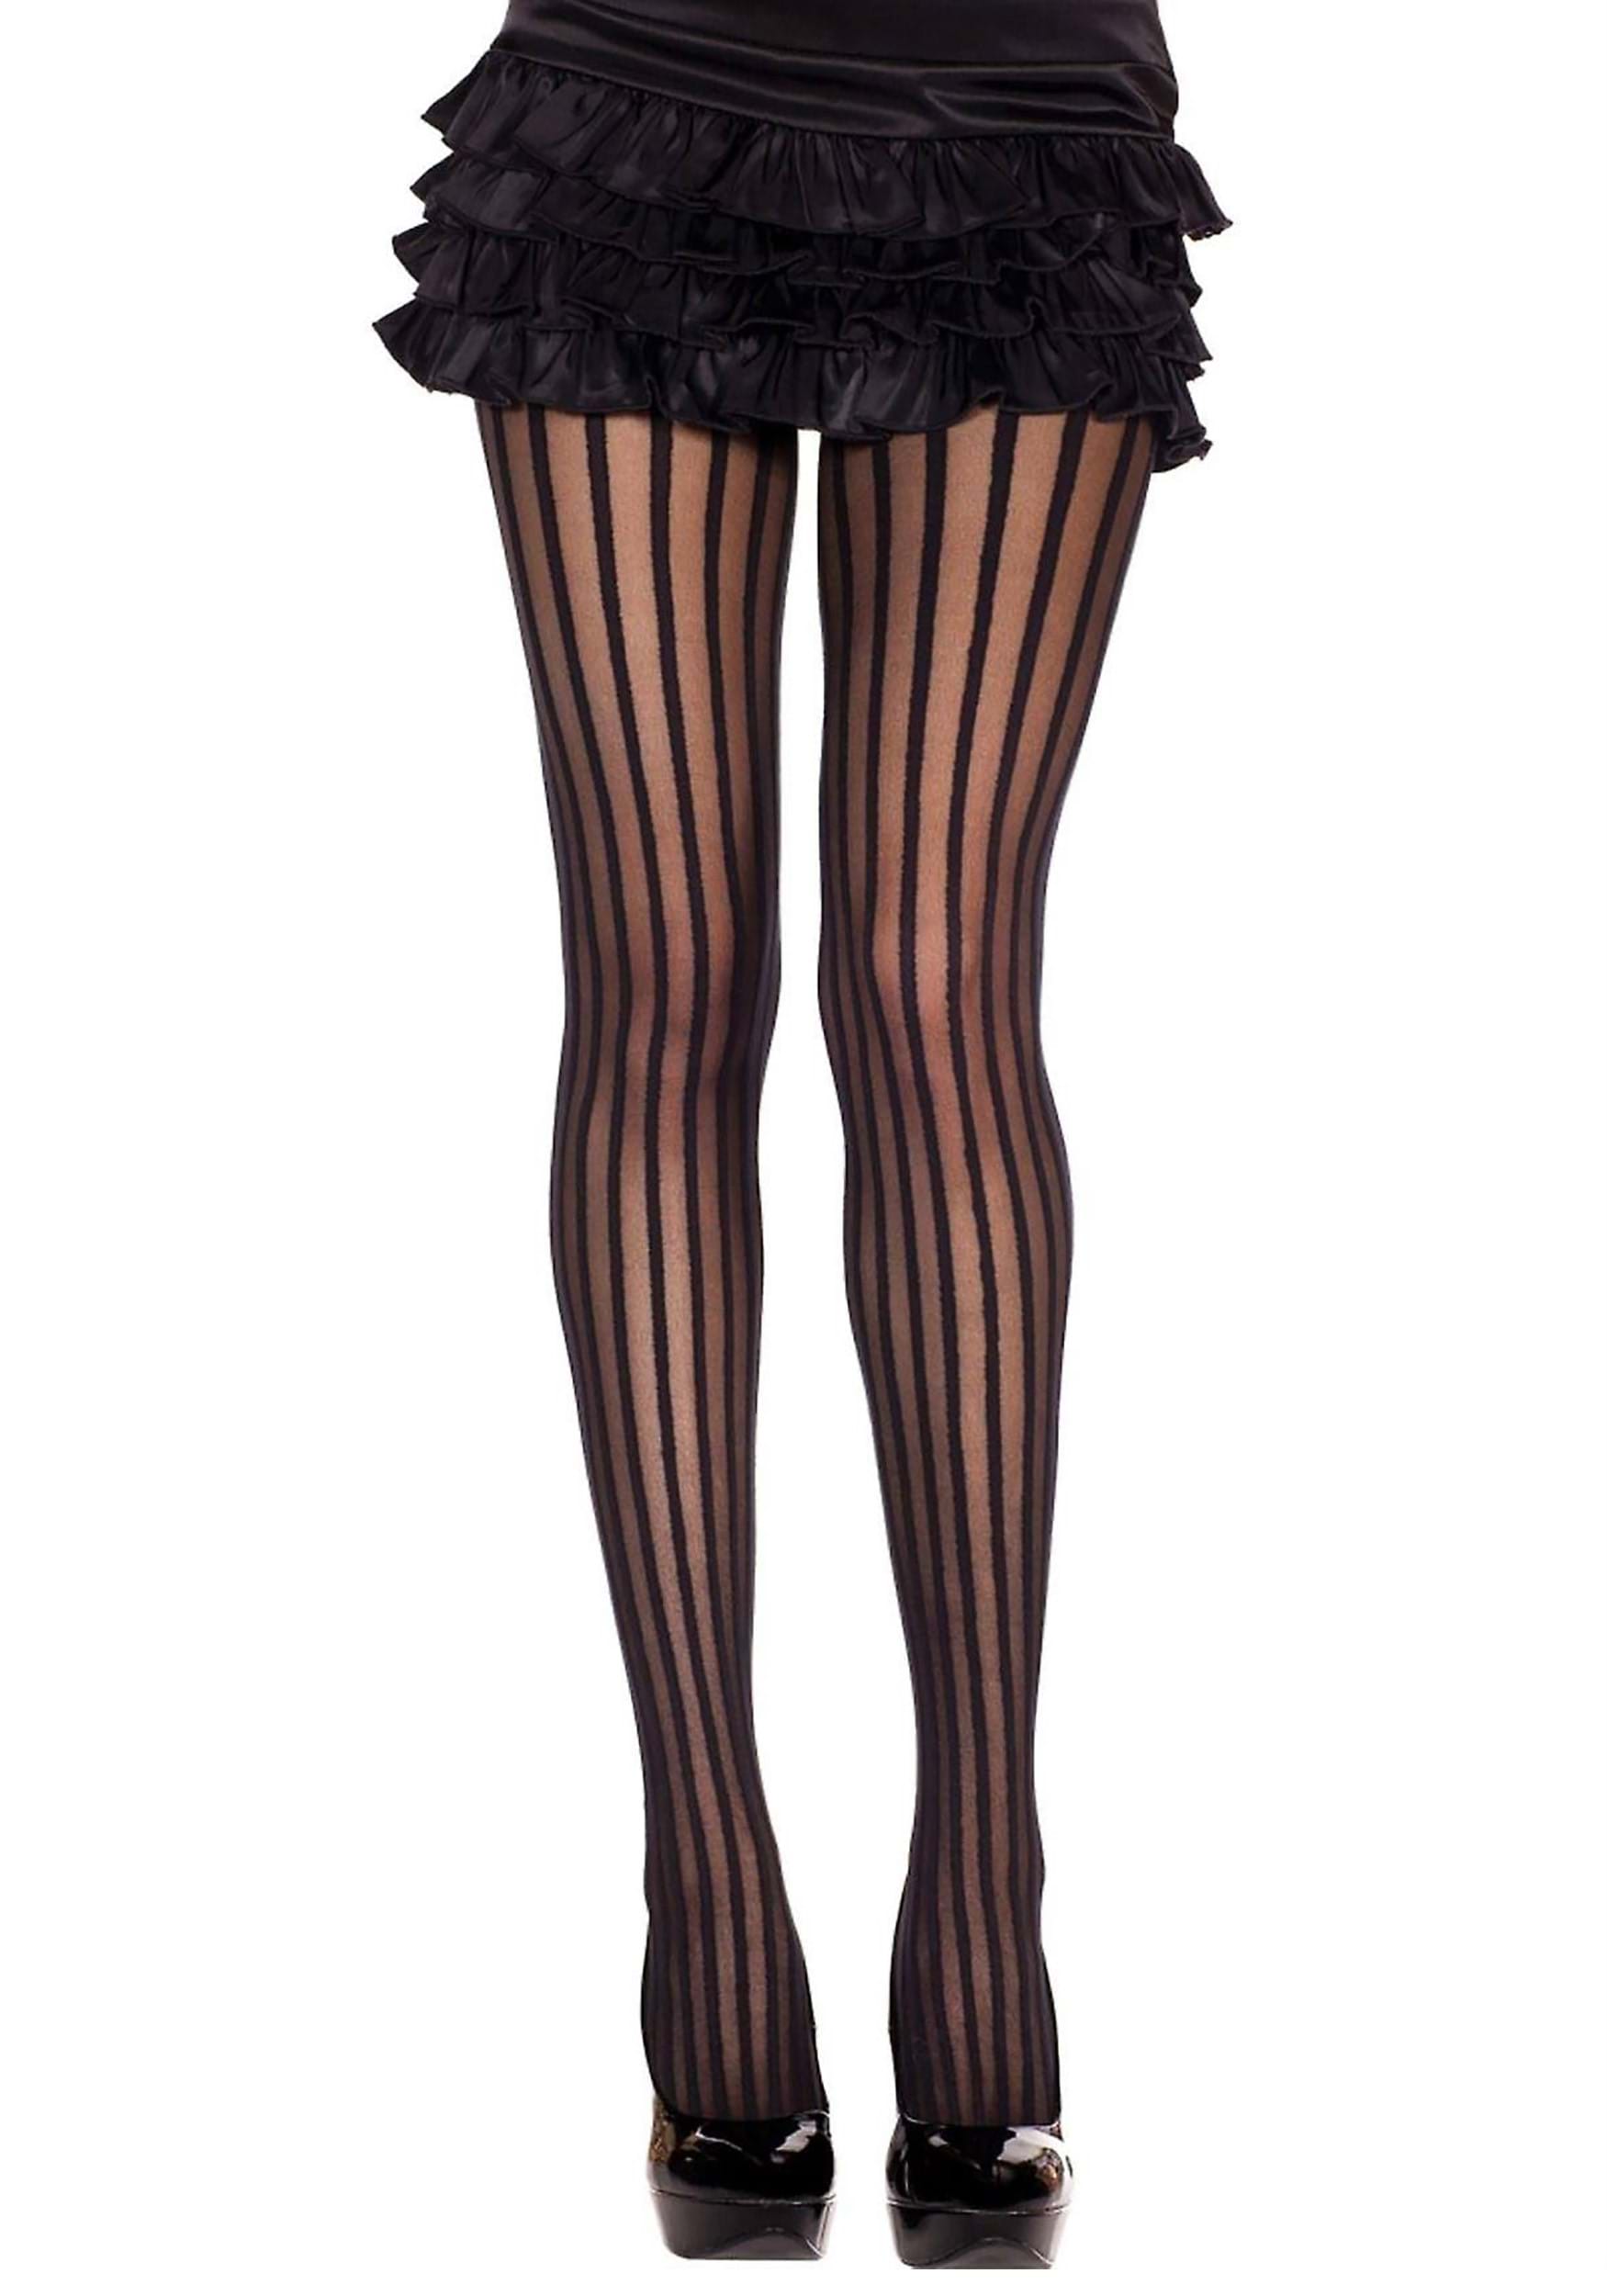 https://images.halloweencostumes.ca/products/93415/1-1/womens-vertical-black-stripe-tights.jpg